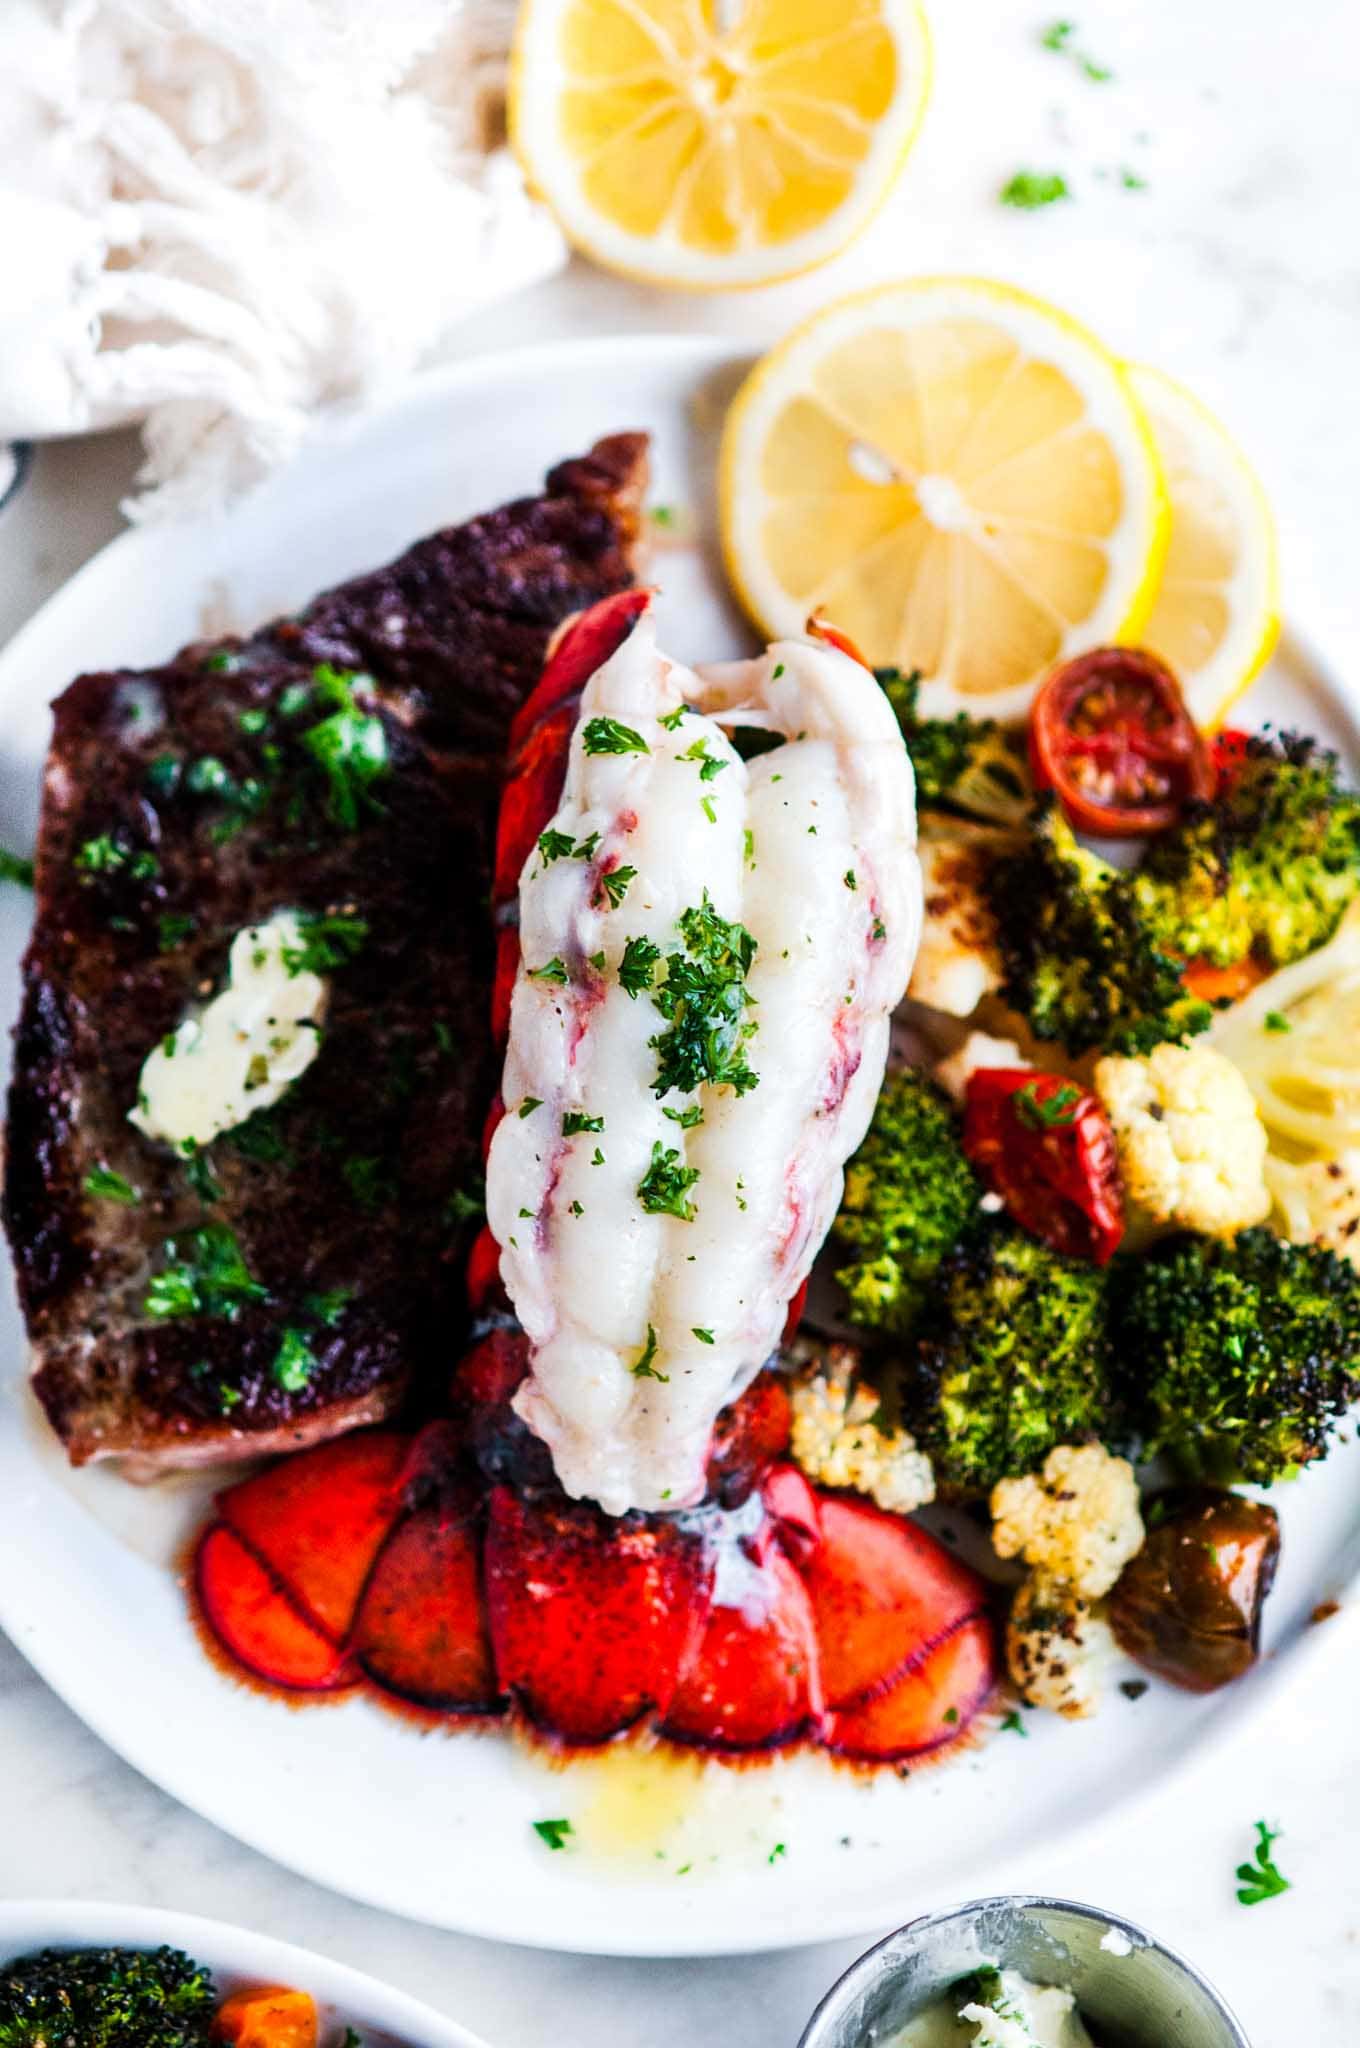 Surf And Turf Steak And Lobster Tail For Two Aberdeen S Kitchen